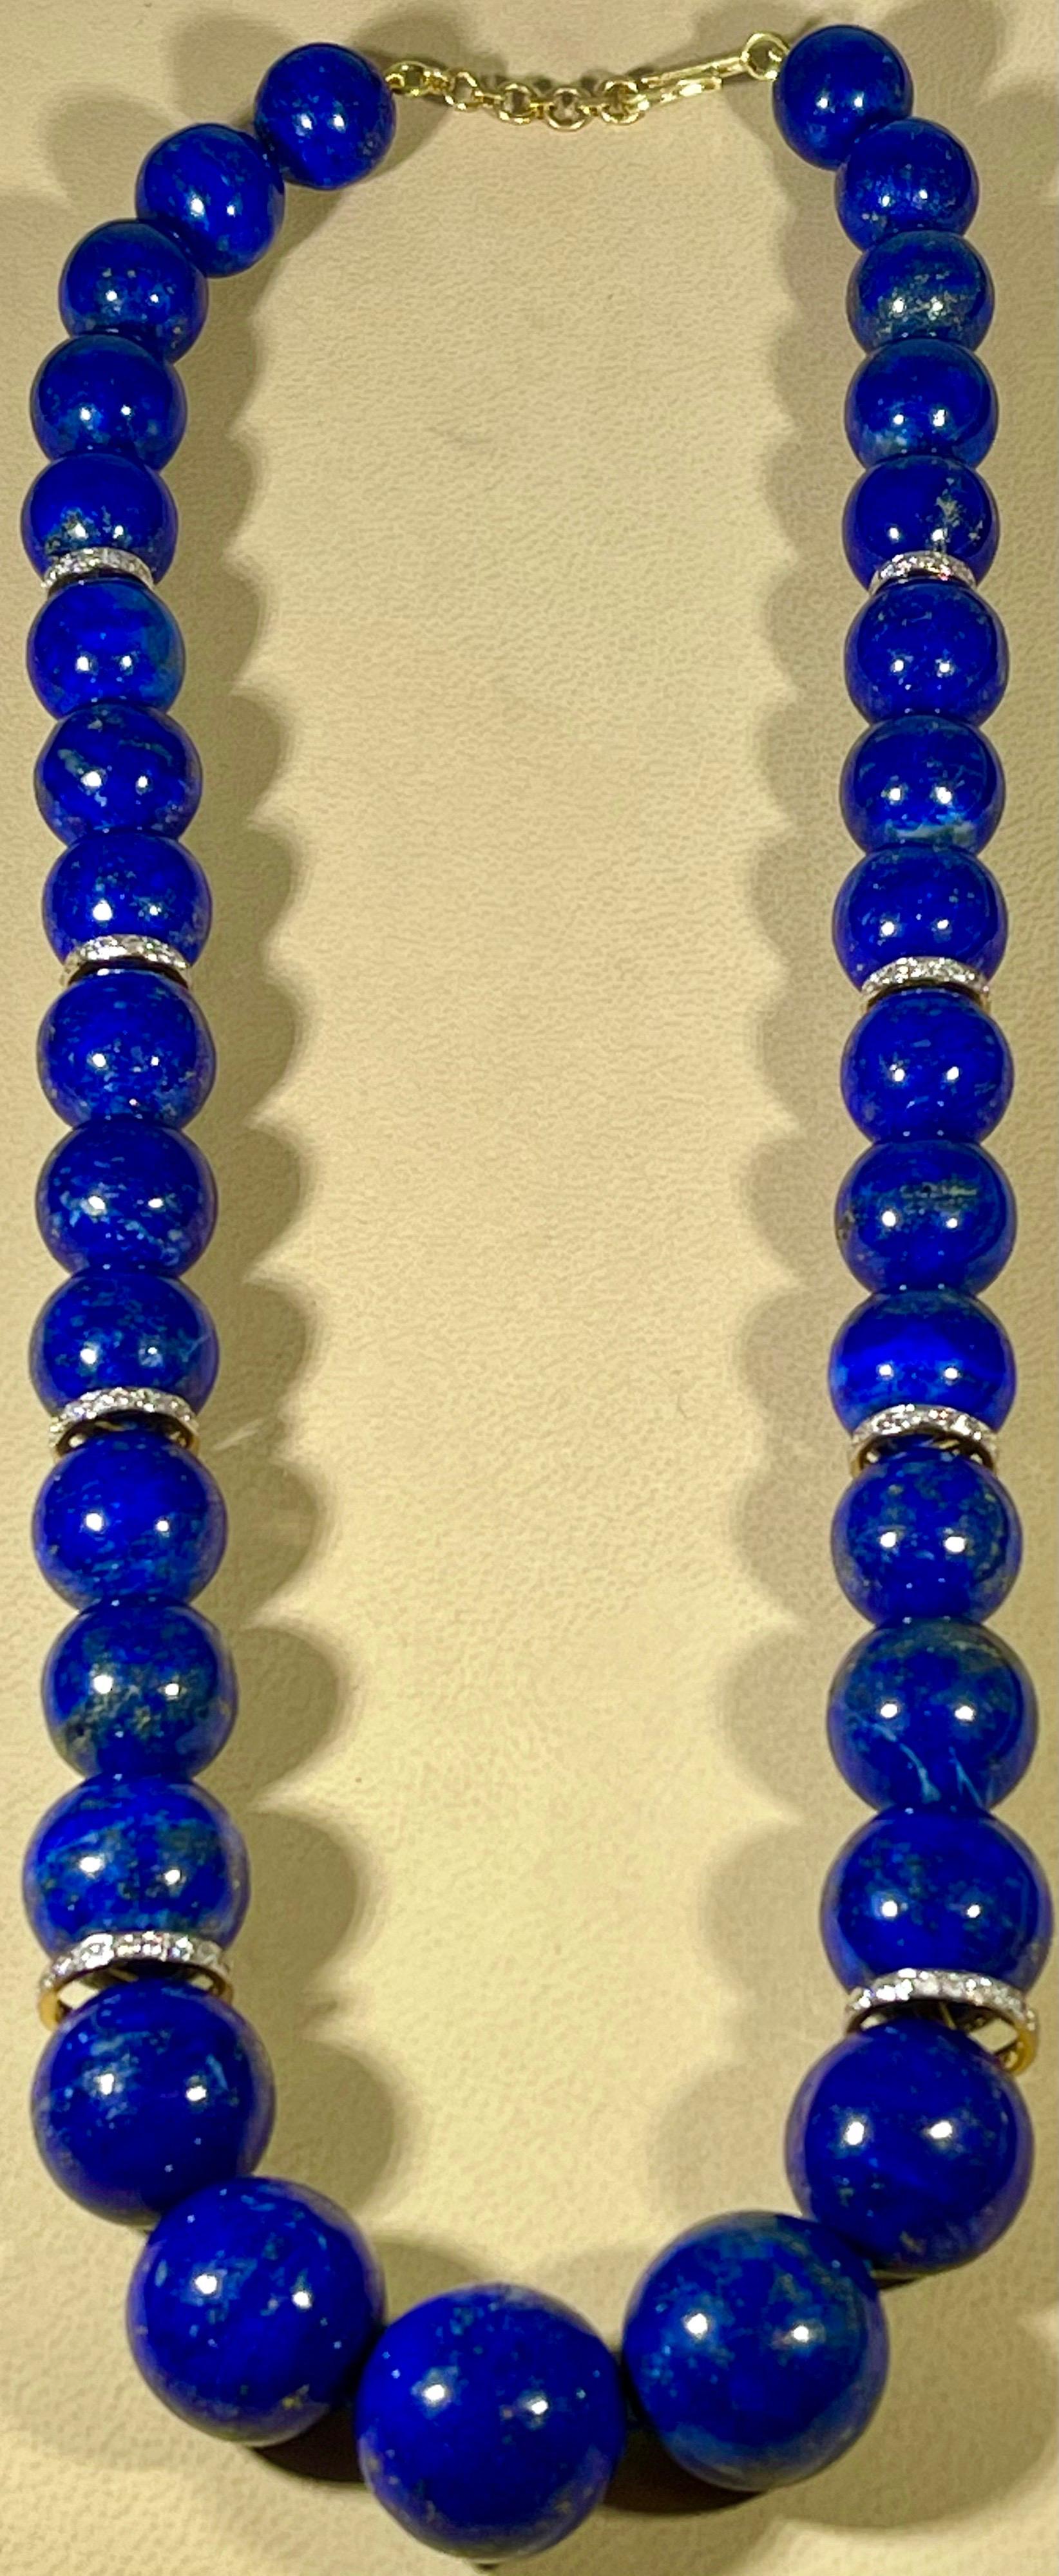 Vintage Lapis Lazuli Single Strand Necklace With Diamond &14 Karat Yellow Gold adjustable clasp
This marvelous vintage Lapis Lazuli  necklace features 1 row of luscious  huge Beads
(measuring approximately from  13-18 mm)  . It is a graduating